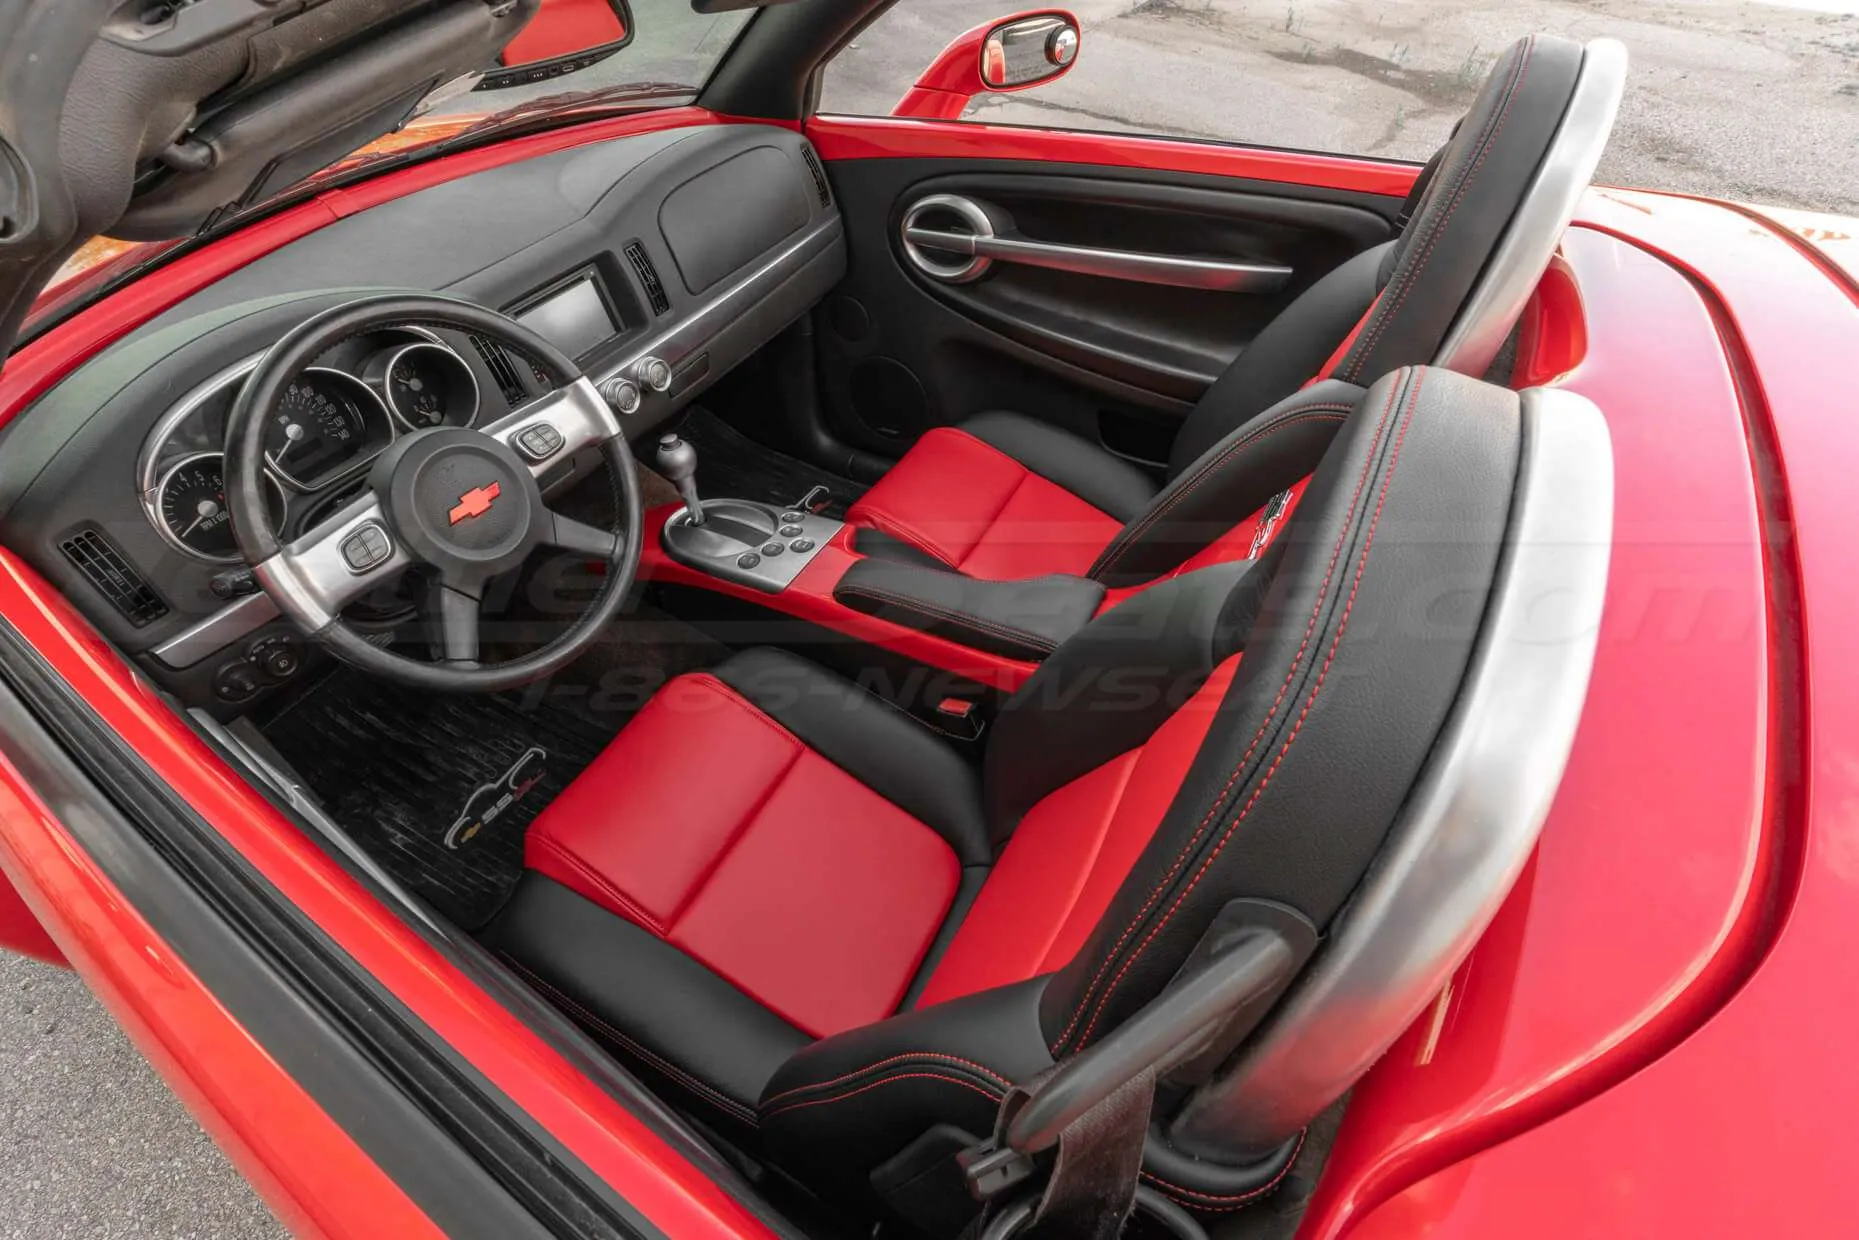 Top-down view of Chevy SSR with two-tone leather interior